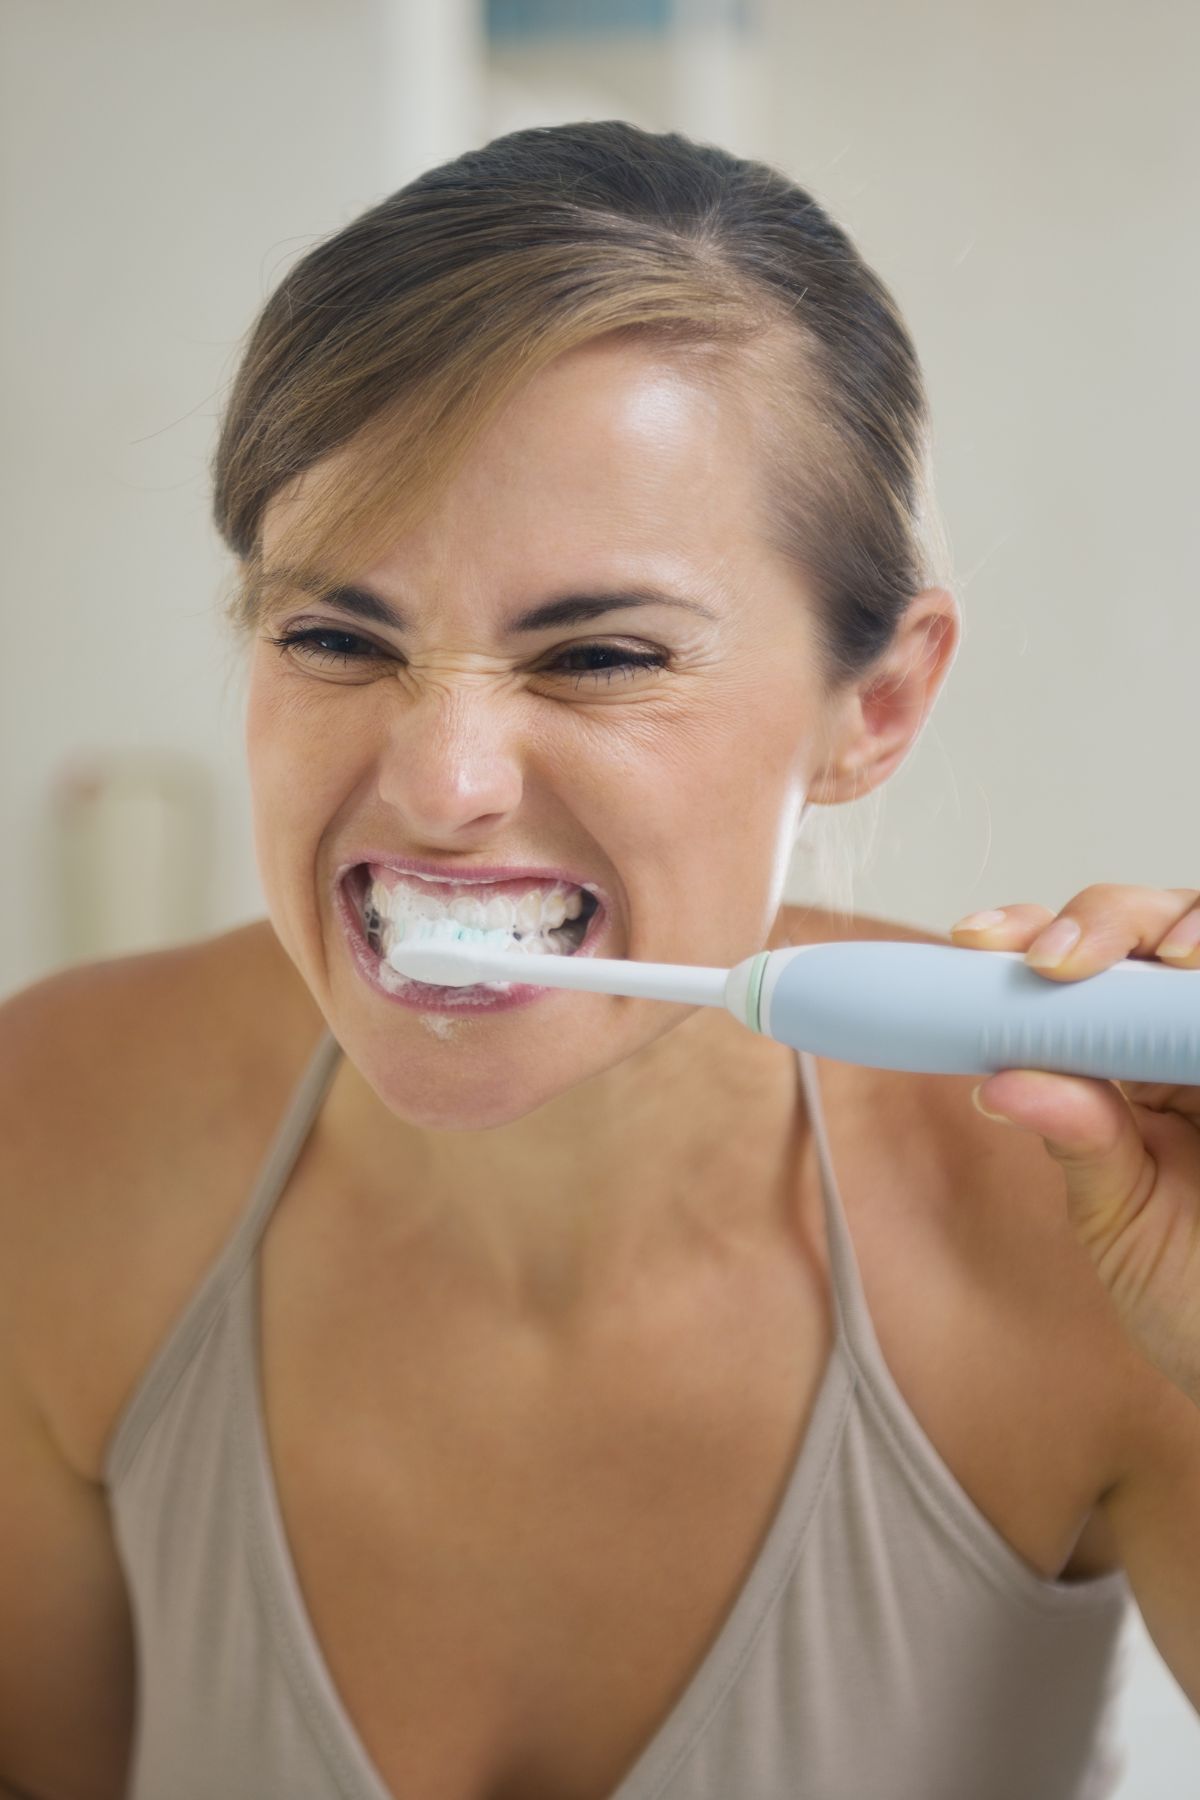 Woman in gray tank top brushes her teeth with an electric toothbrush.